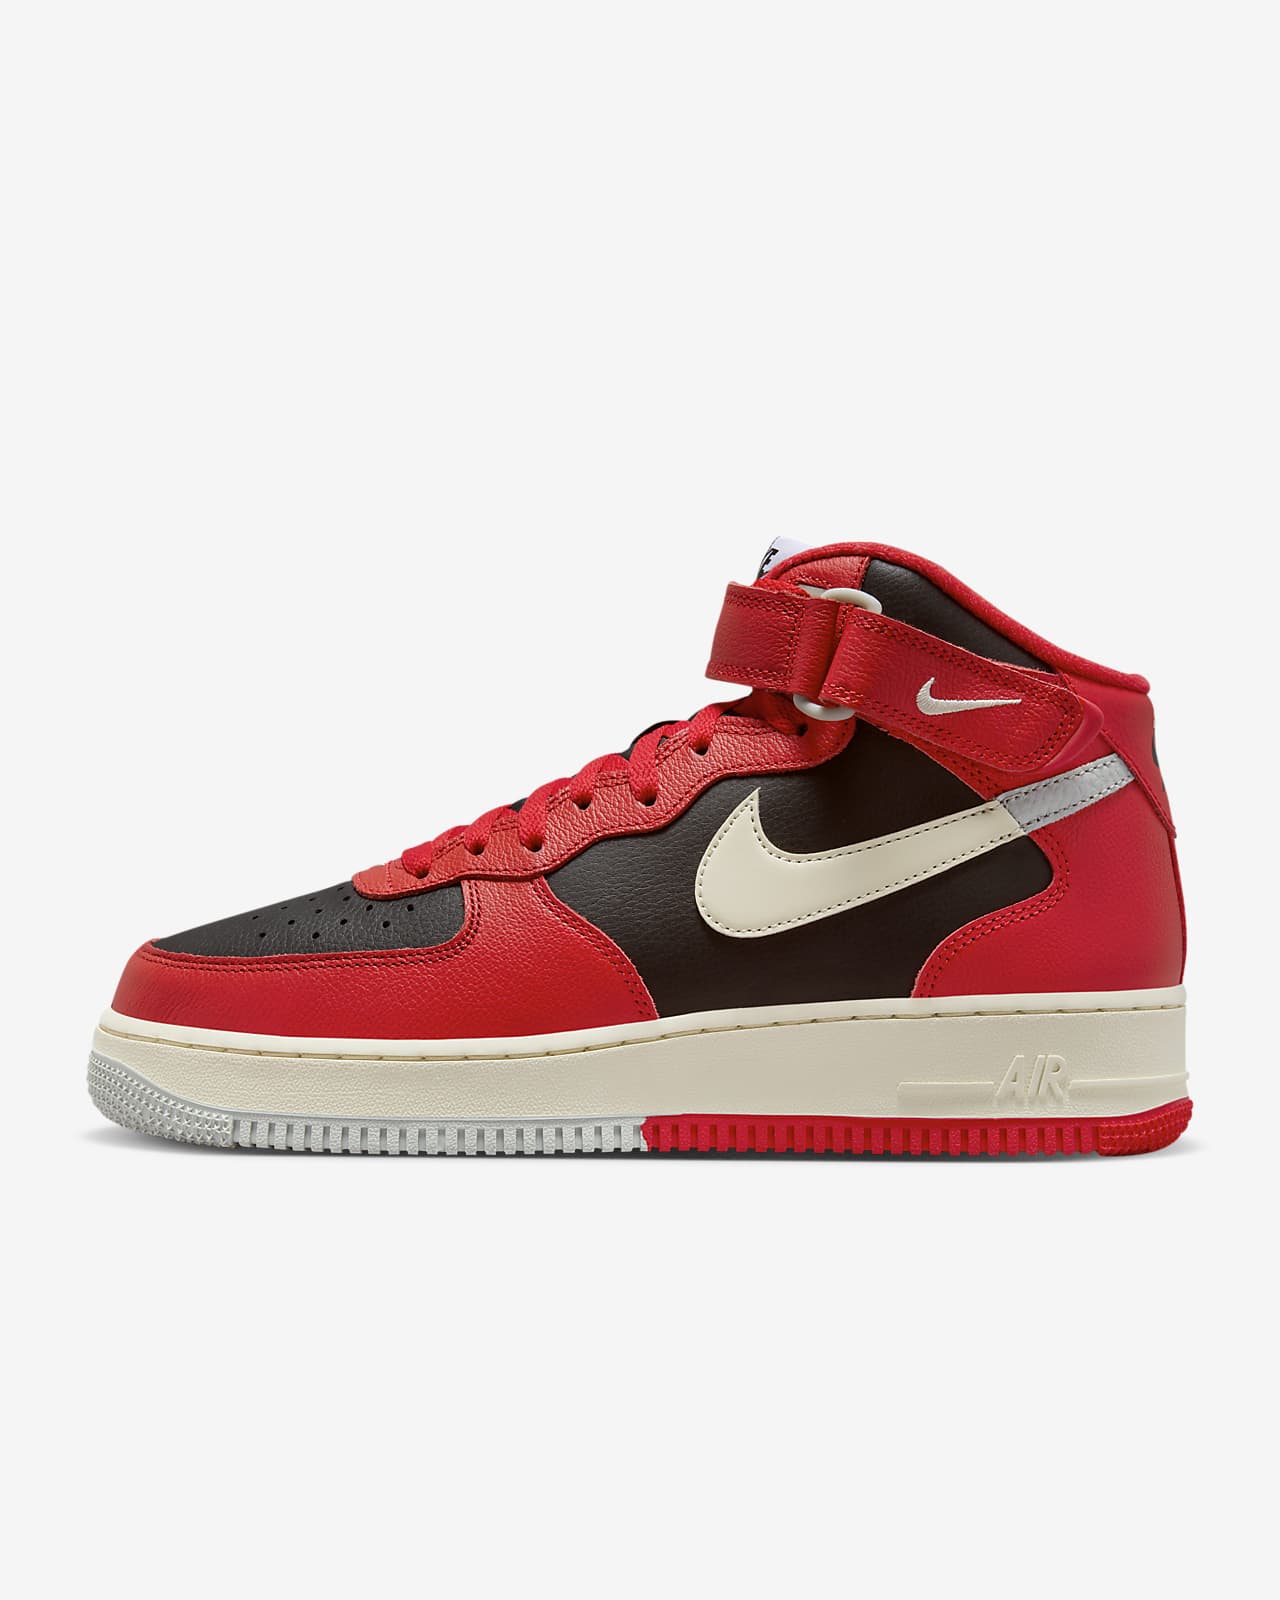 Nike Air Force 1 Mid 07 LV8 Mens Shoes Review